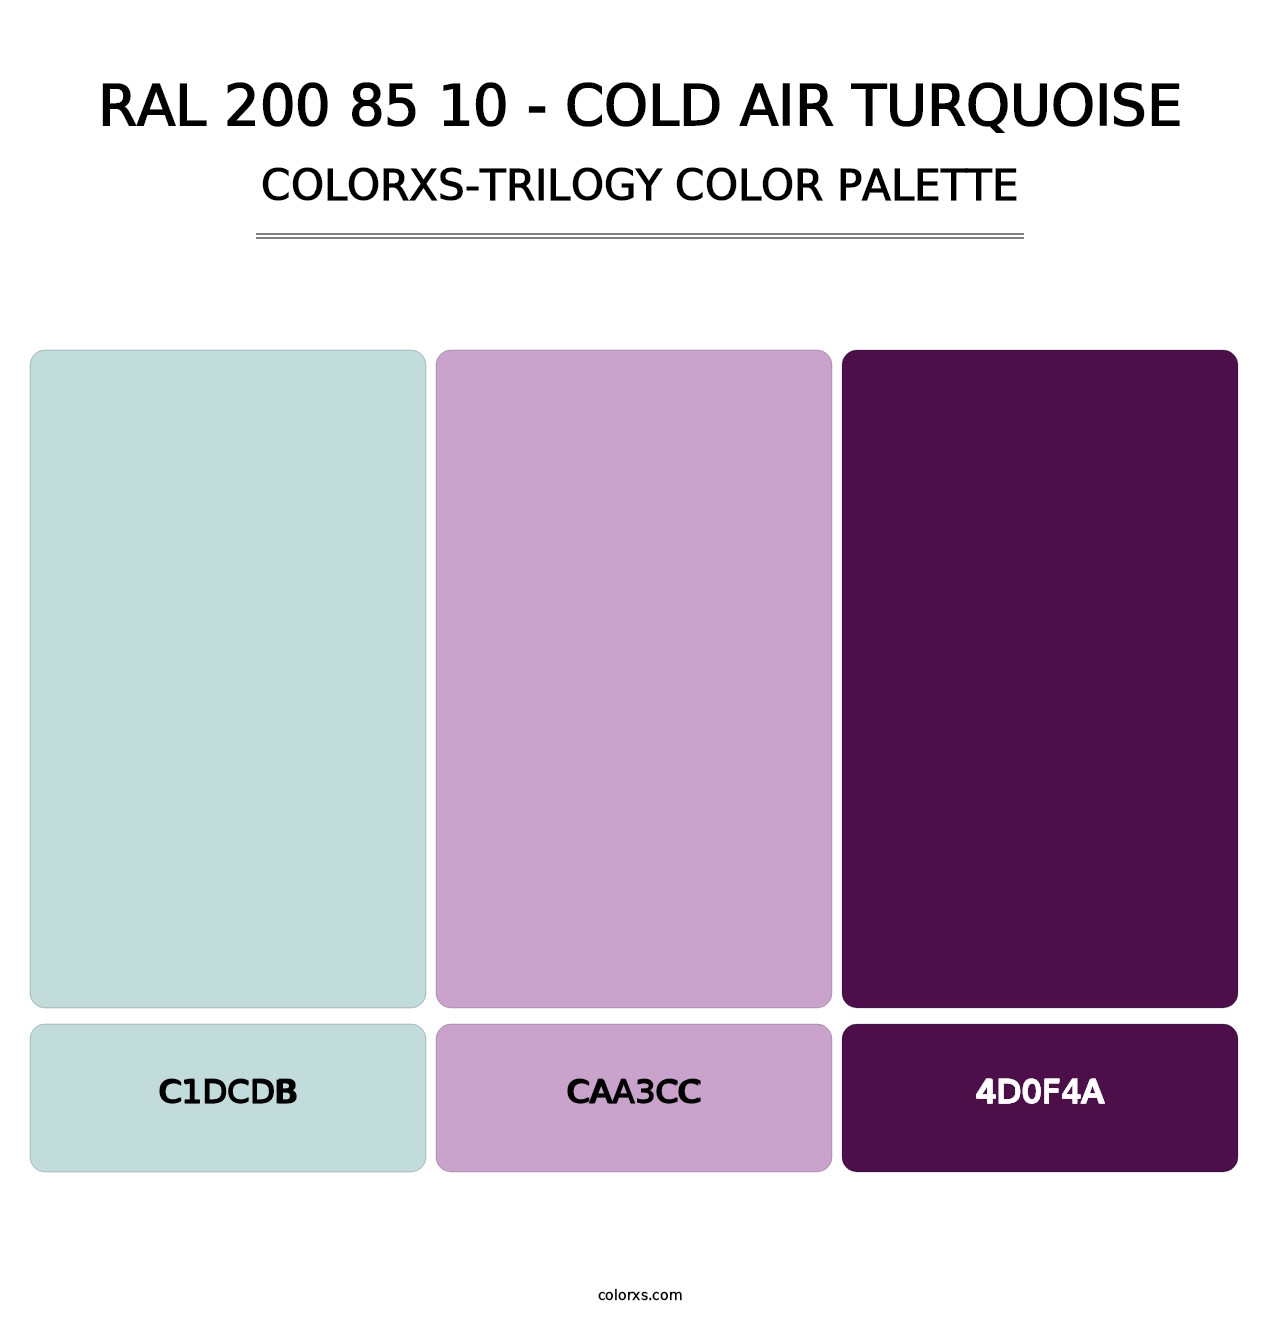 RAL 200 85 10 - Cold Air Turquoise - Colorxs Trilogy Palette